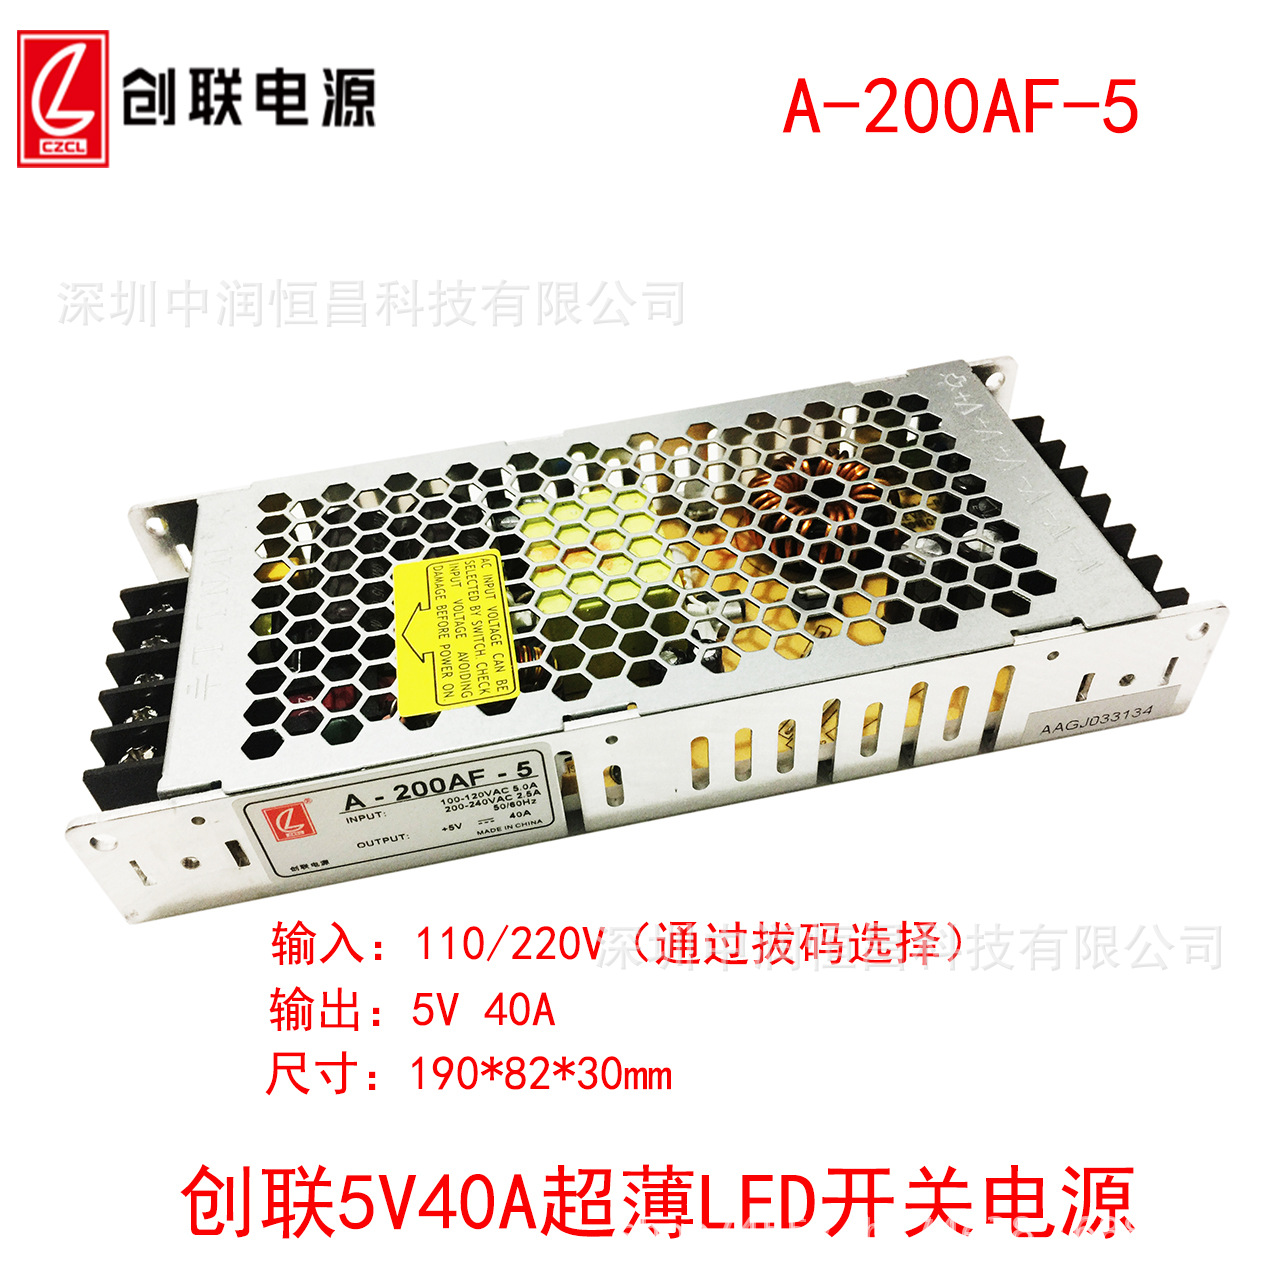 Year of Power A-200AF-5 5V40A 200W 110/220V With switch LED display switch source